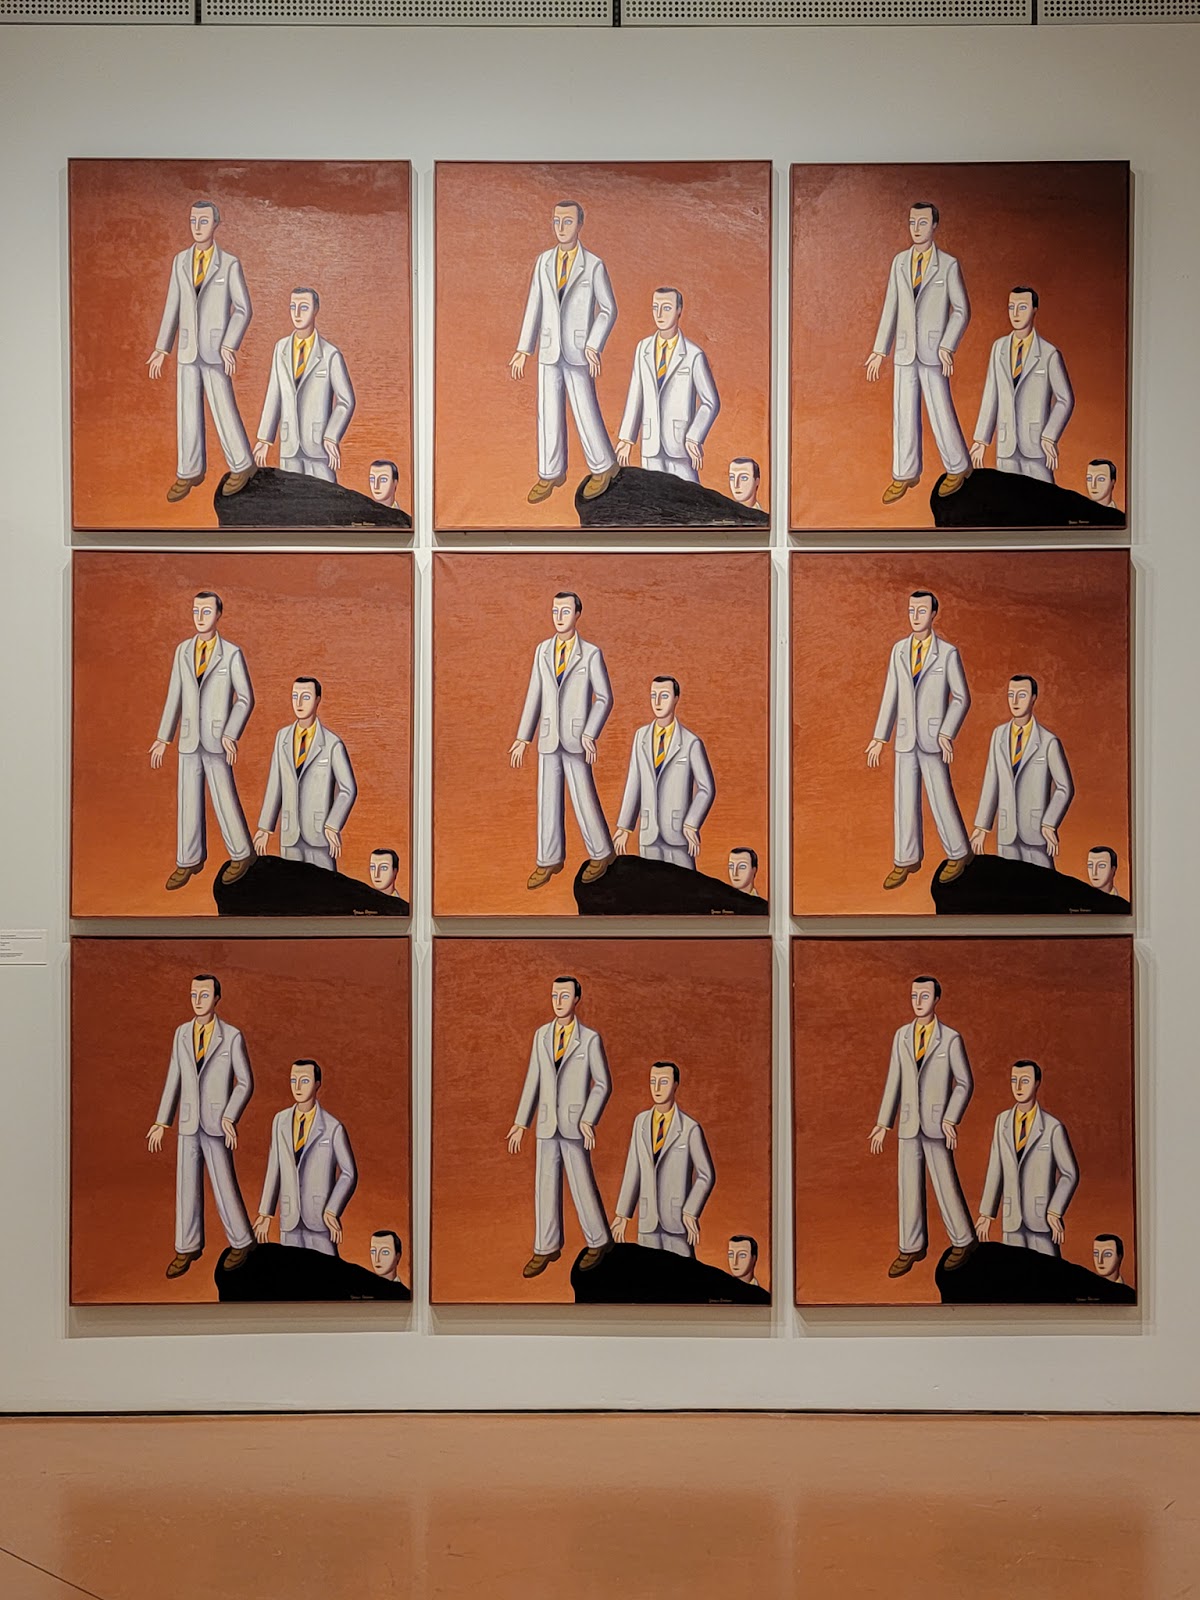 Nonconformist Soviet art at the Zimmerli Museum | A 3x3 grid of the same painting of men walking off a cliff and identical men behind them about to follow suit.